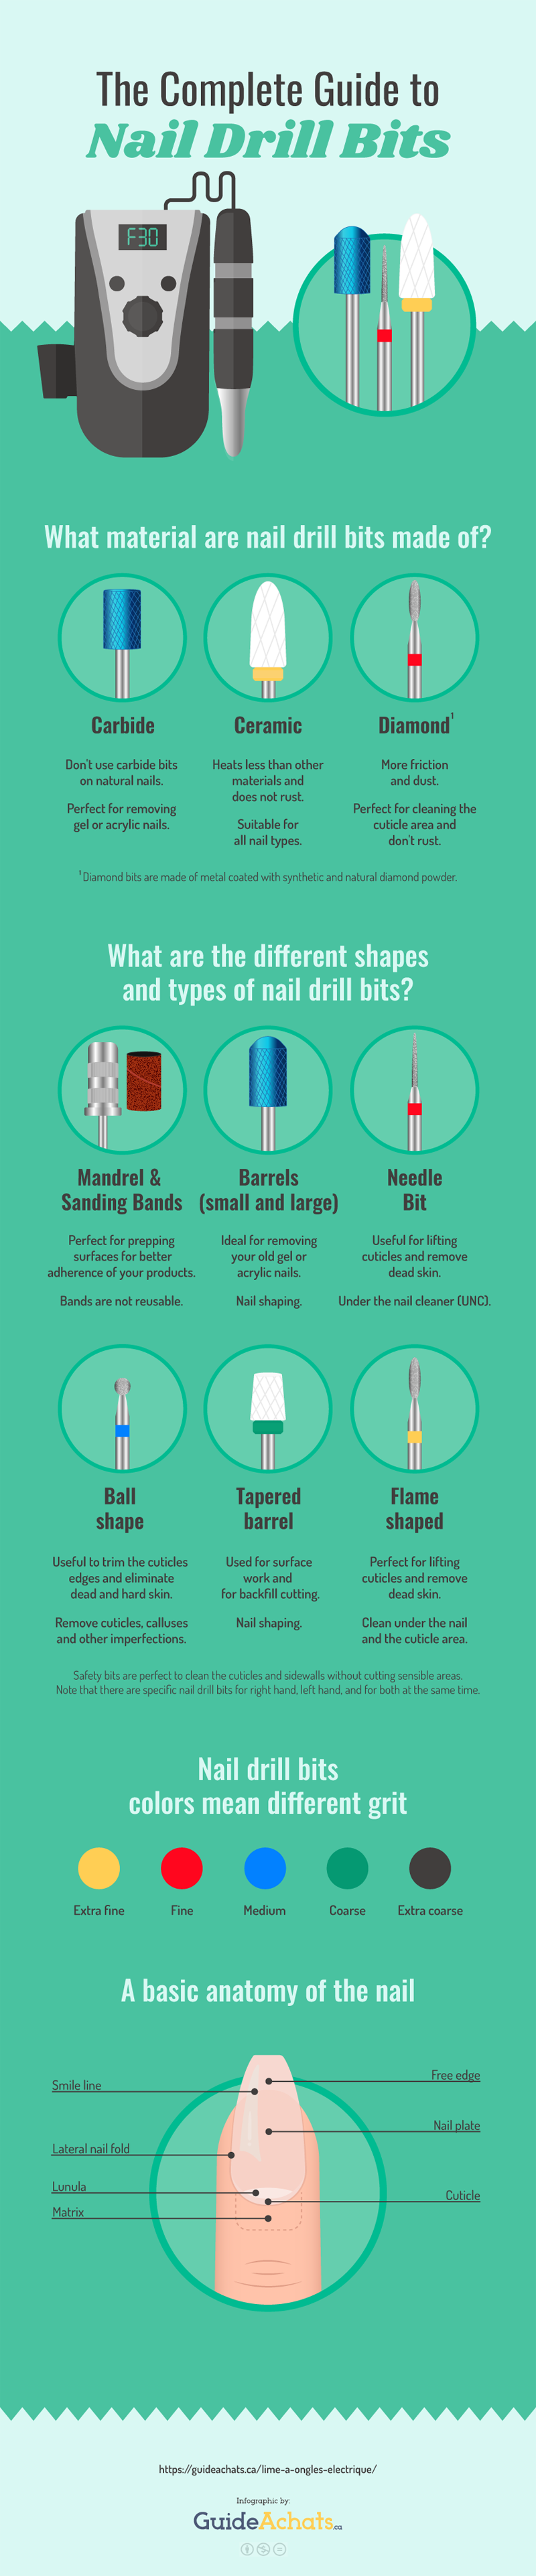 The Complete Guide to Nail Drill Bits #infographic #best infographic #infographic s